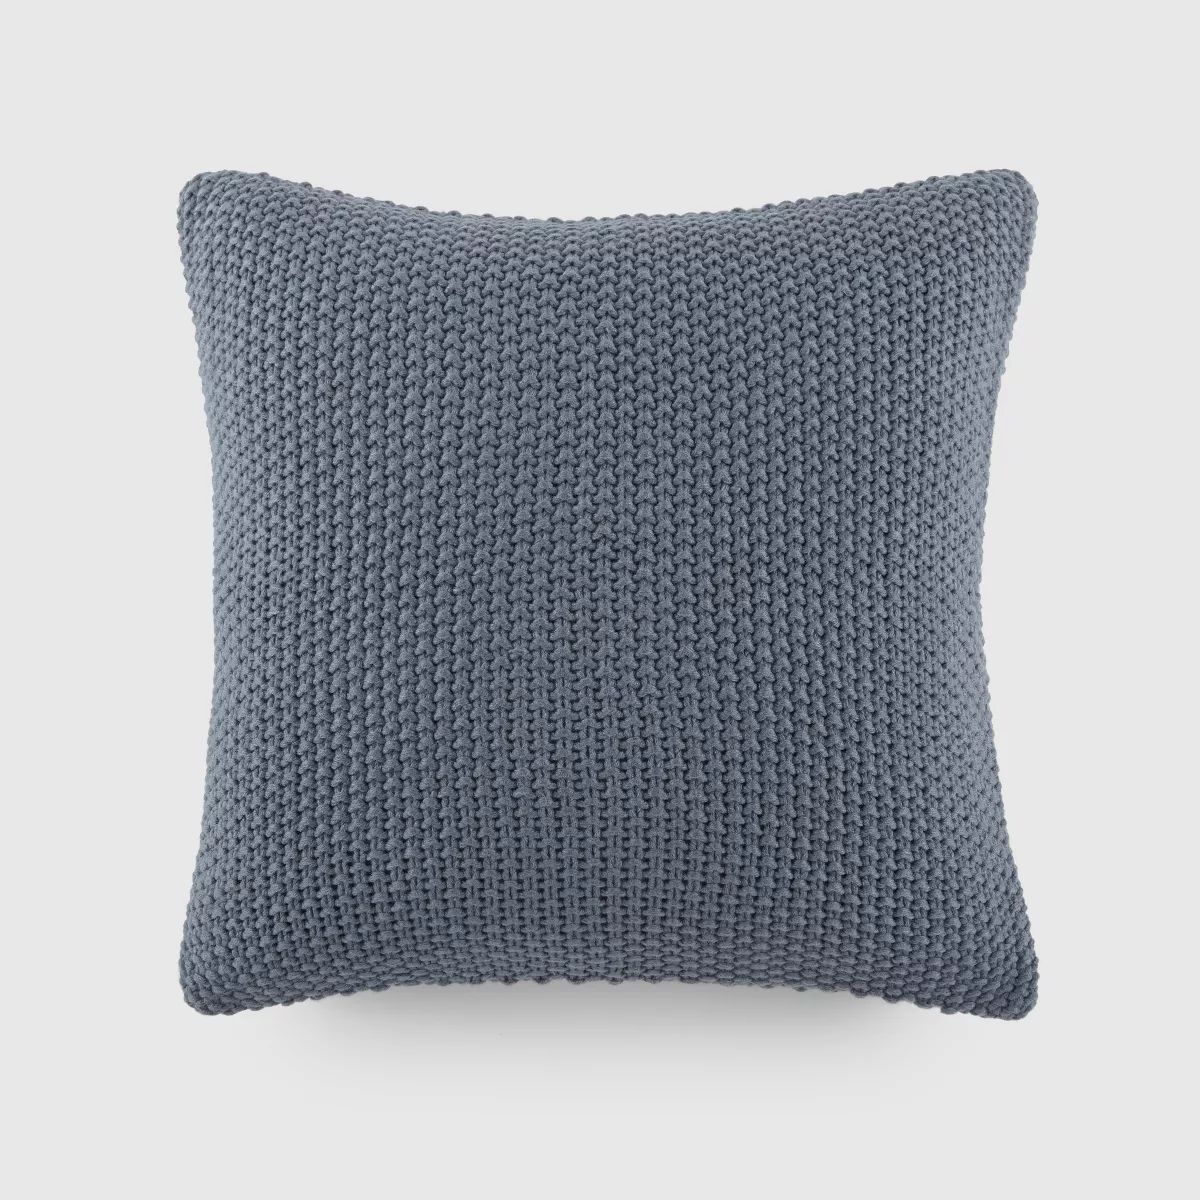 Stitch Knit Throw Pillow Cover And Pillow Insert - Becky Cameron | Target